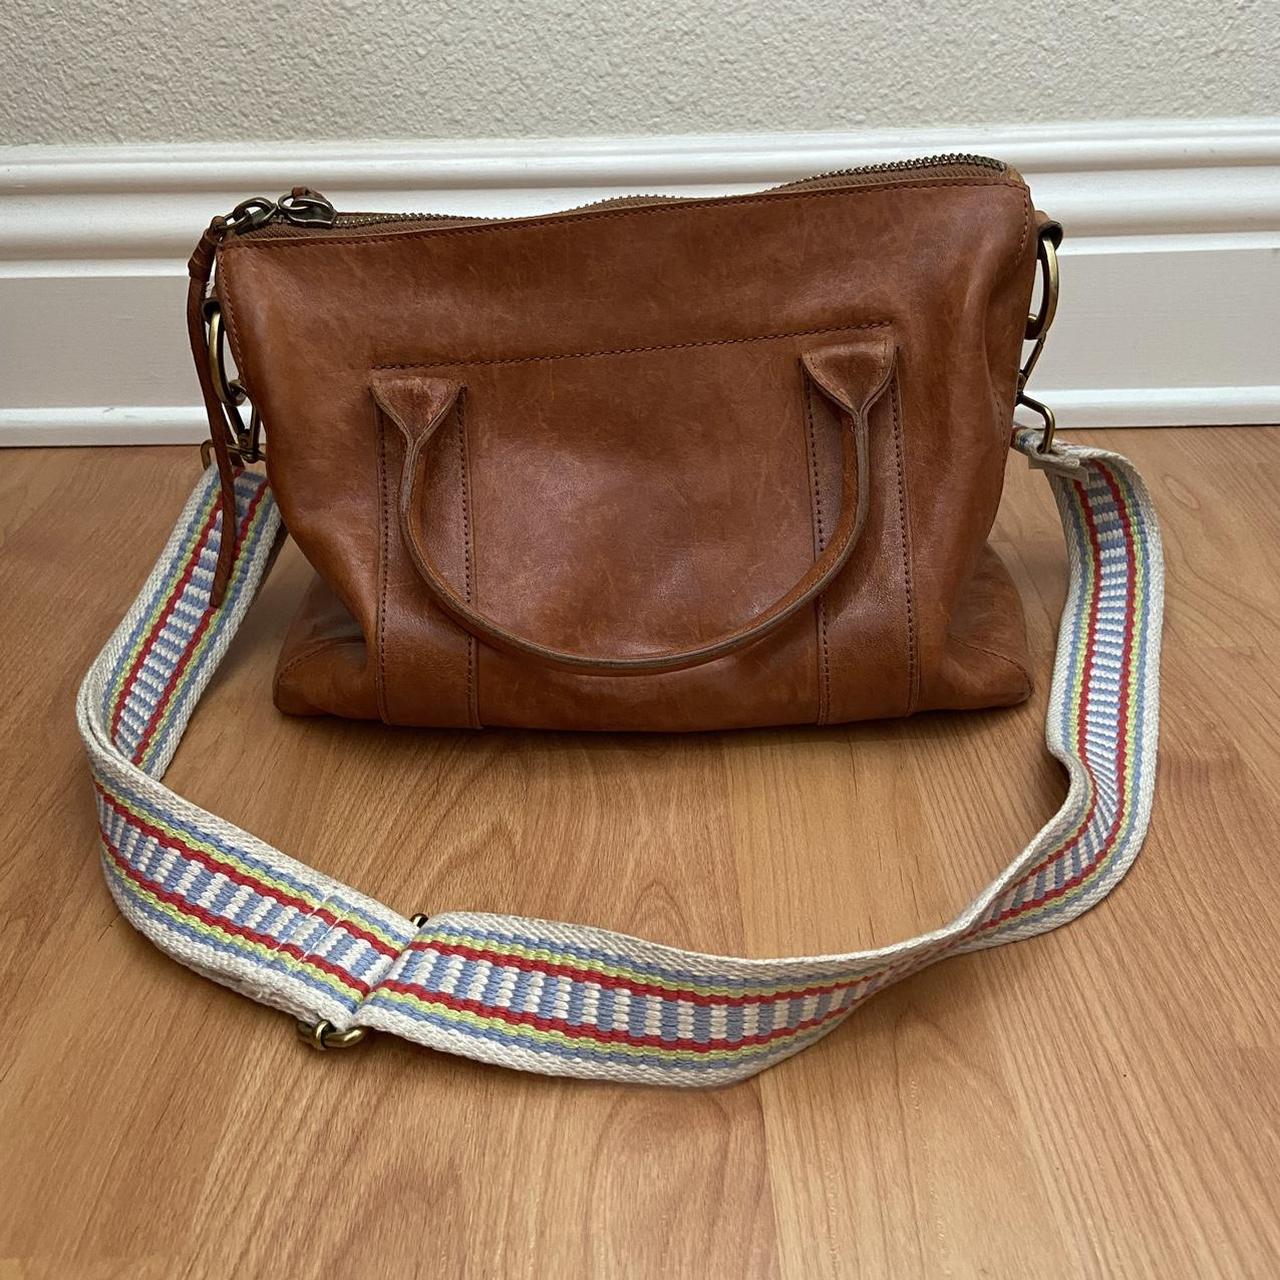 J.Crew: Camera Bag In Pebbled Leather For Women